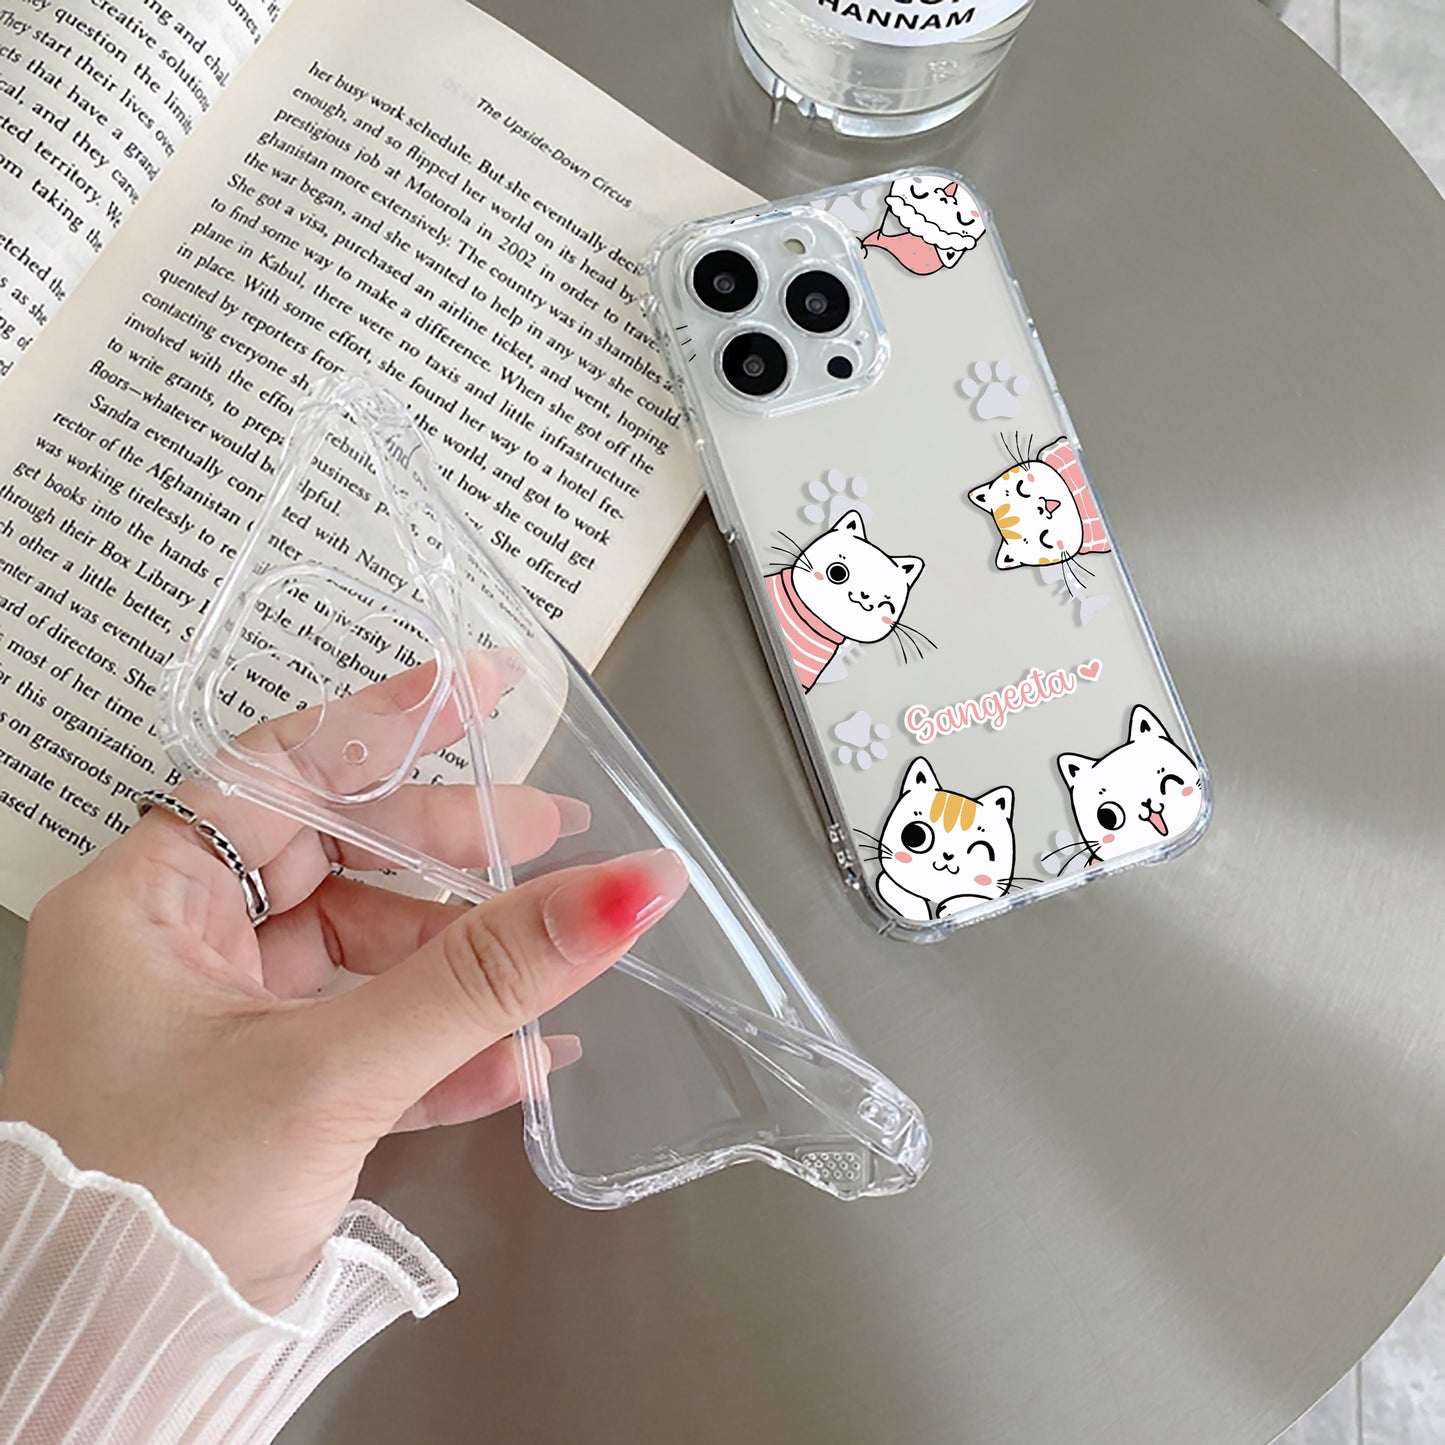 Cute Cat Customize Transparent Silicon Case For IPhone